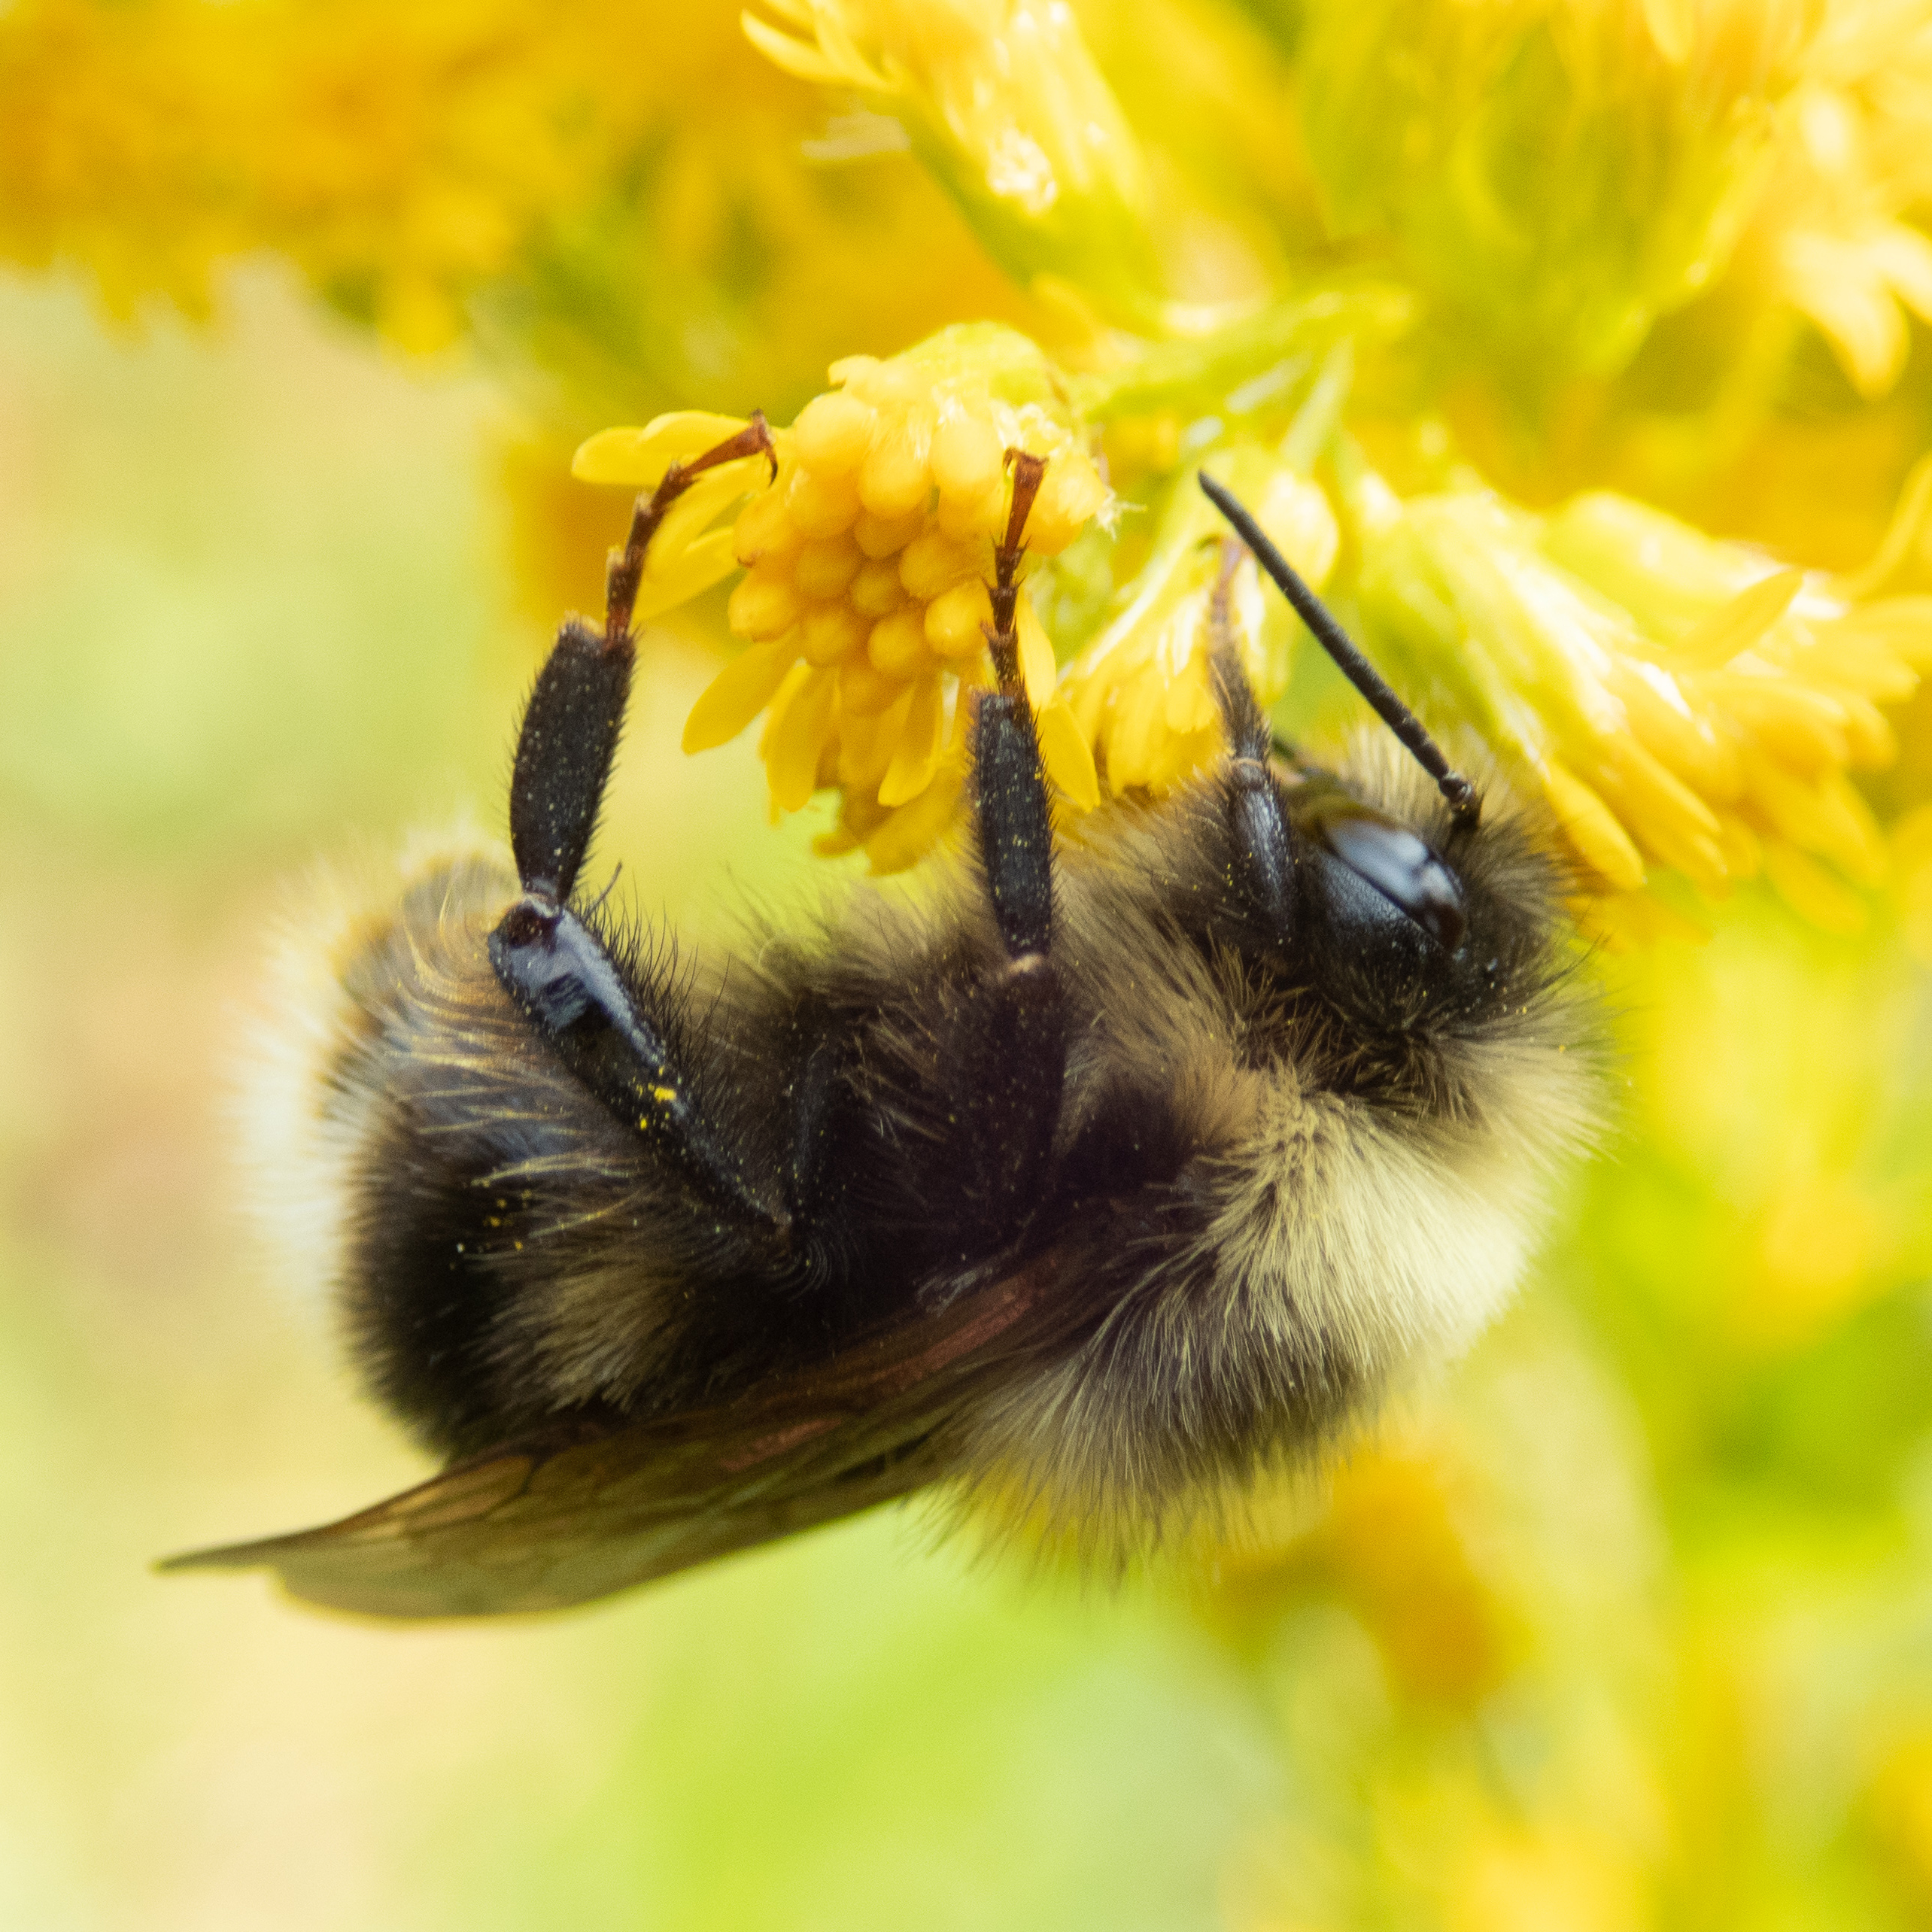 A fuzzy bumble with long hair bee clings upside down to a yellow flower.